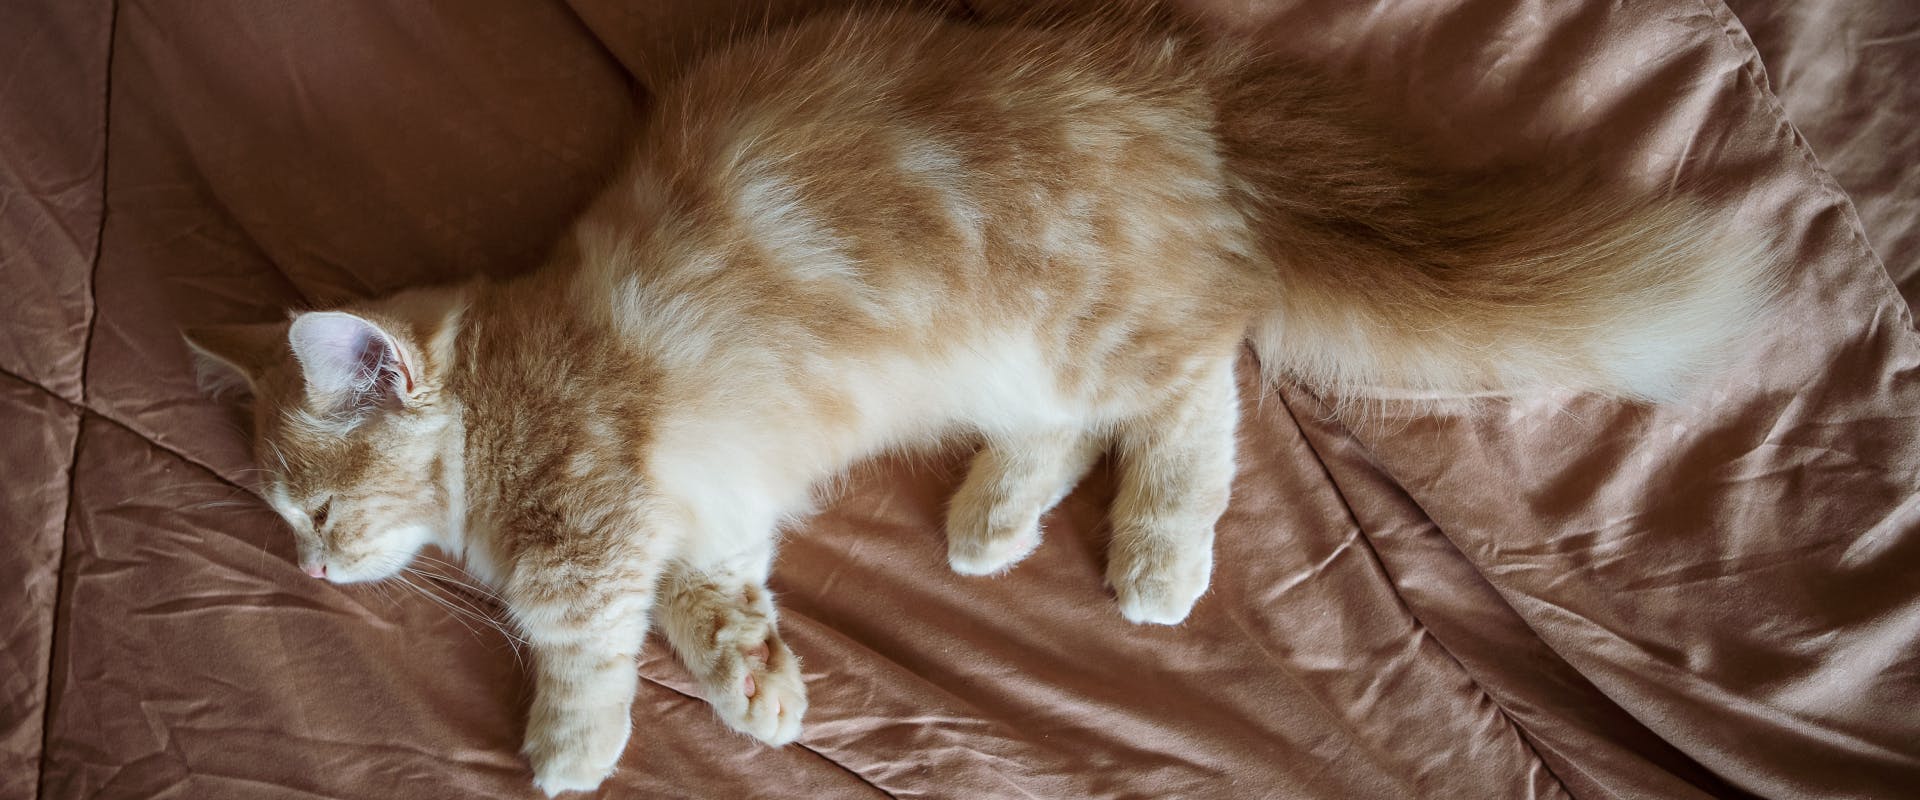 a long-haired ginger tabby munchkin lying on a dark pink bedspread